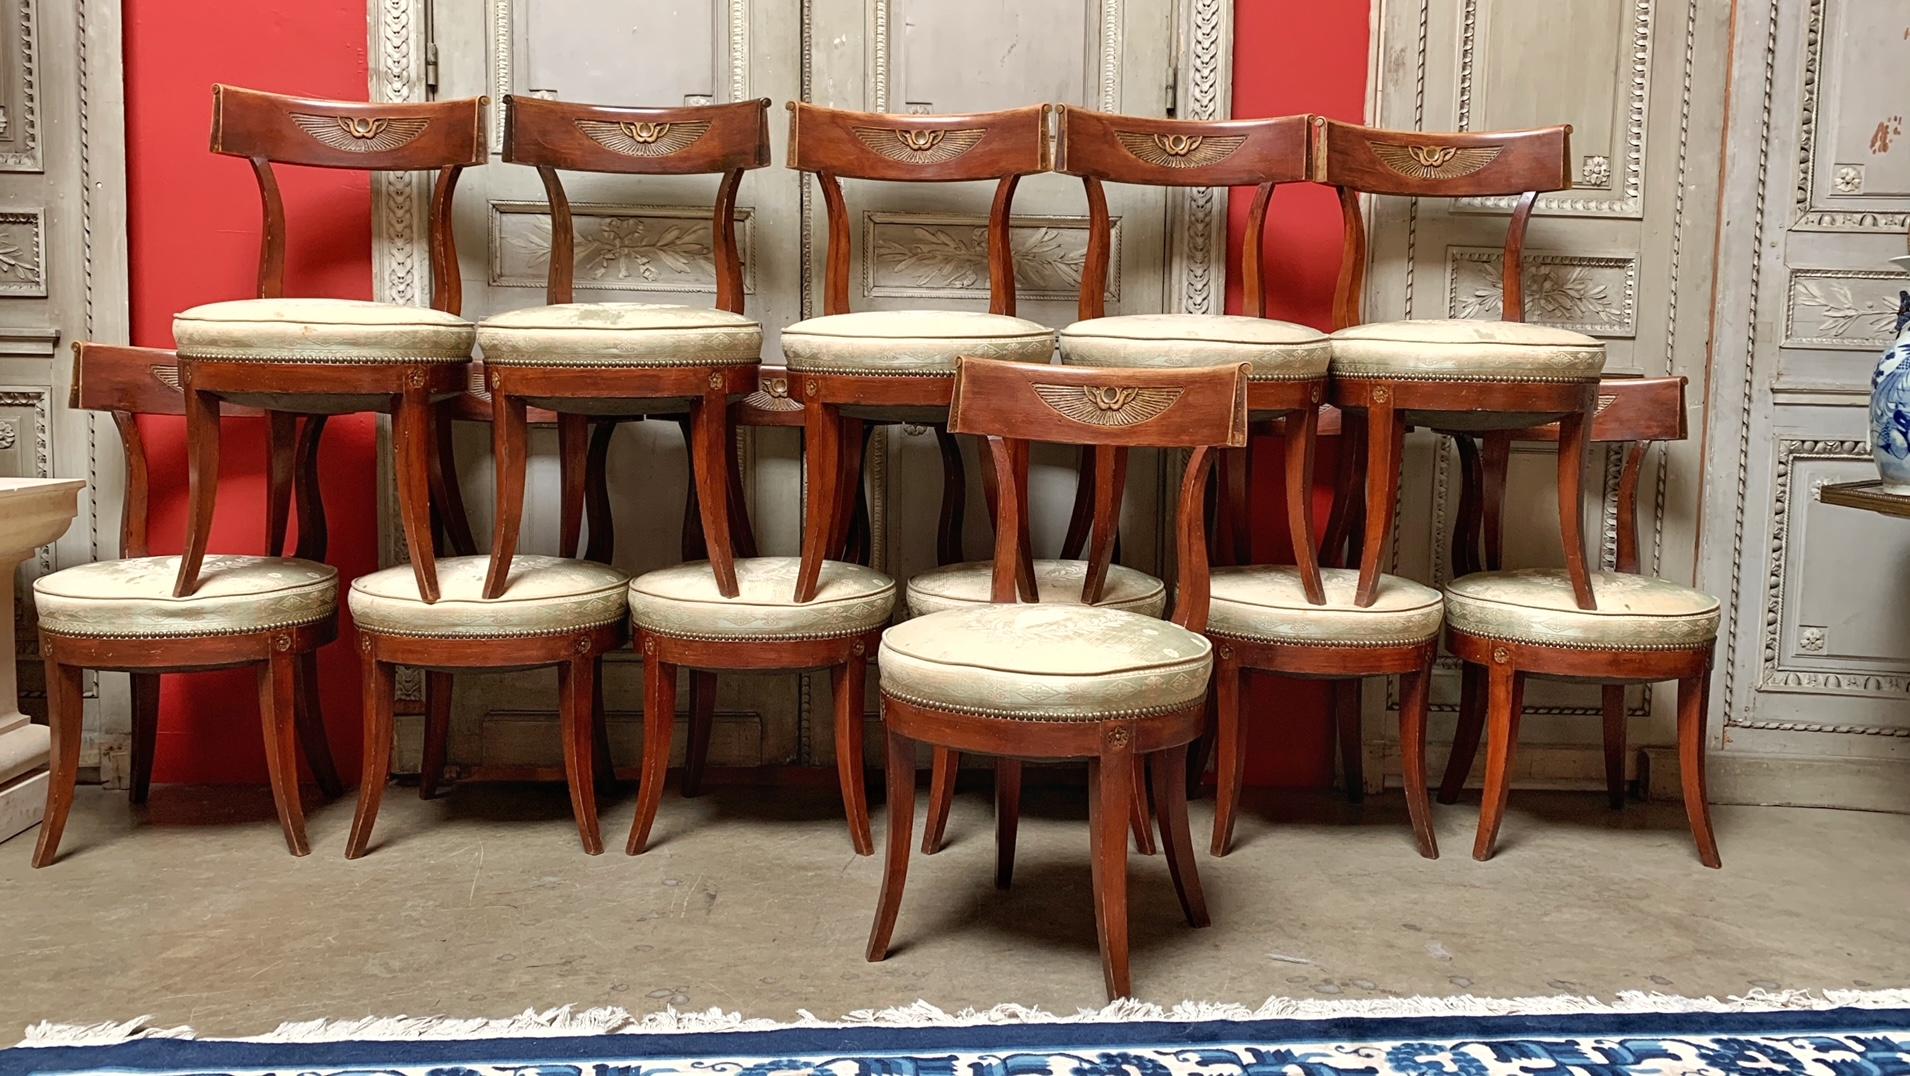 Twelve Regence style dining chairs with klismos style legs and a double headed eagled carved on each chair. They are not large chairs but are comfortable. The few of the chairs have had some old repairs and could be refinished or lacquered. They